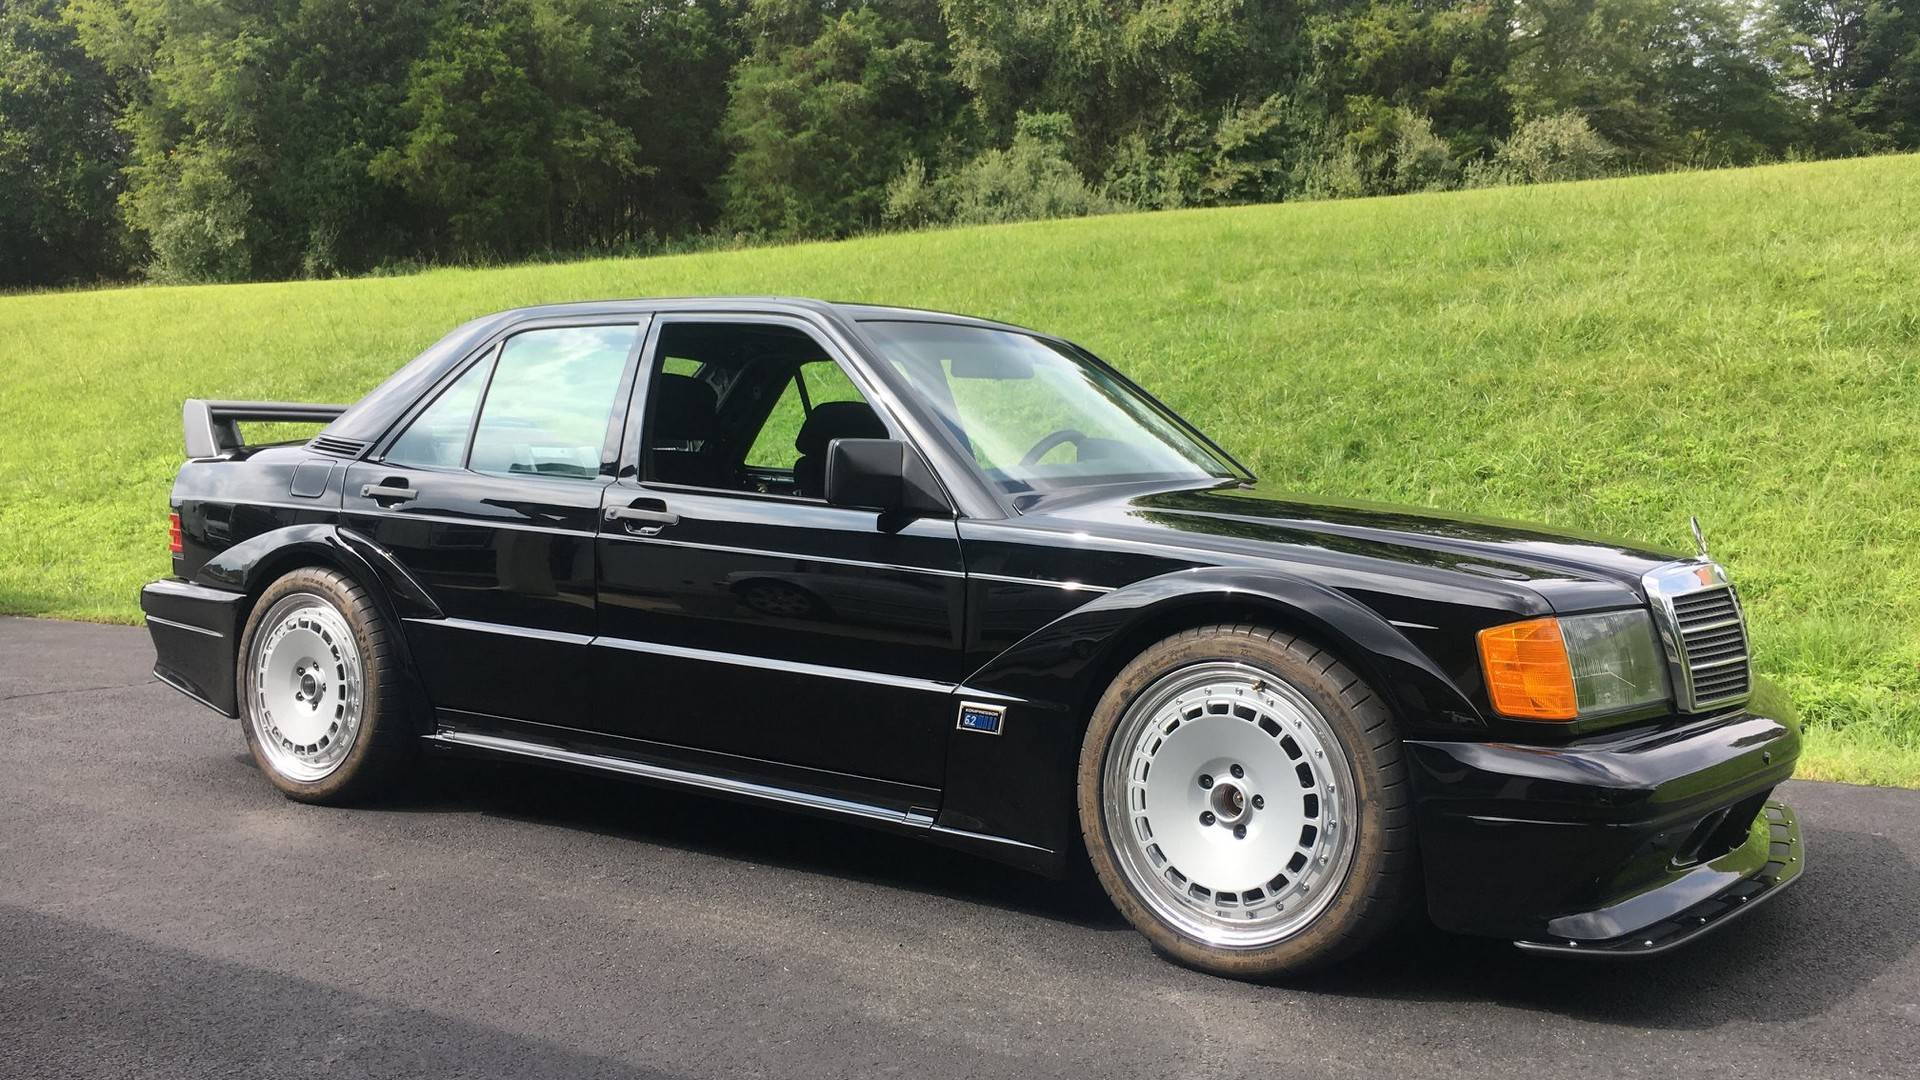 Mercedes-Benz 190E merged with C63 AMG